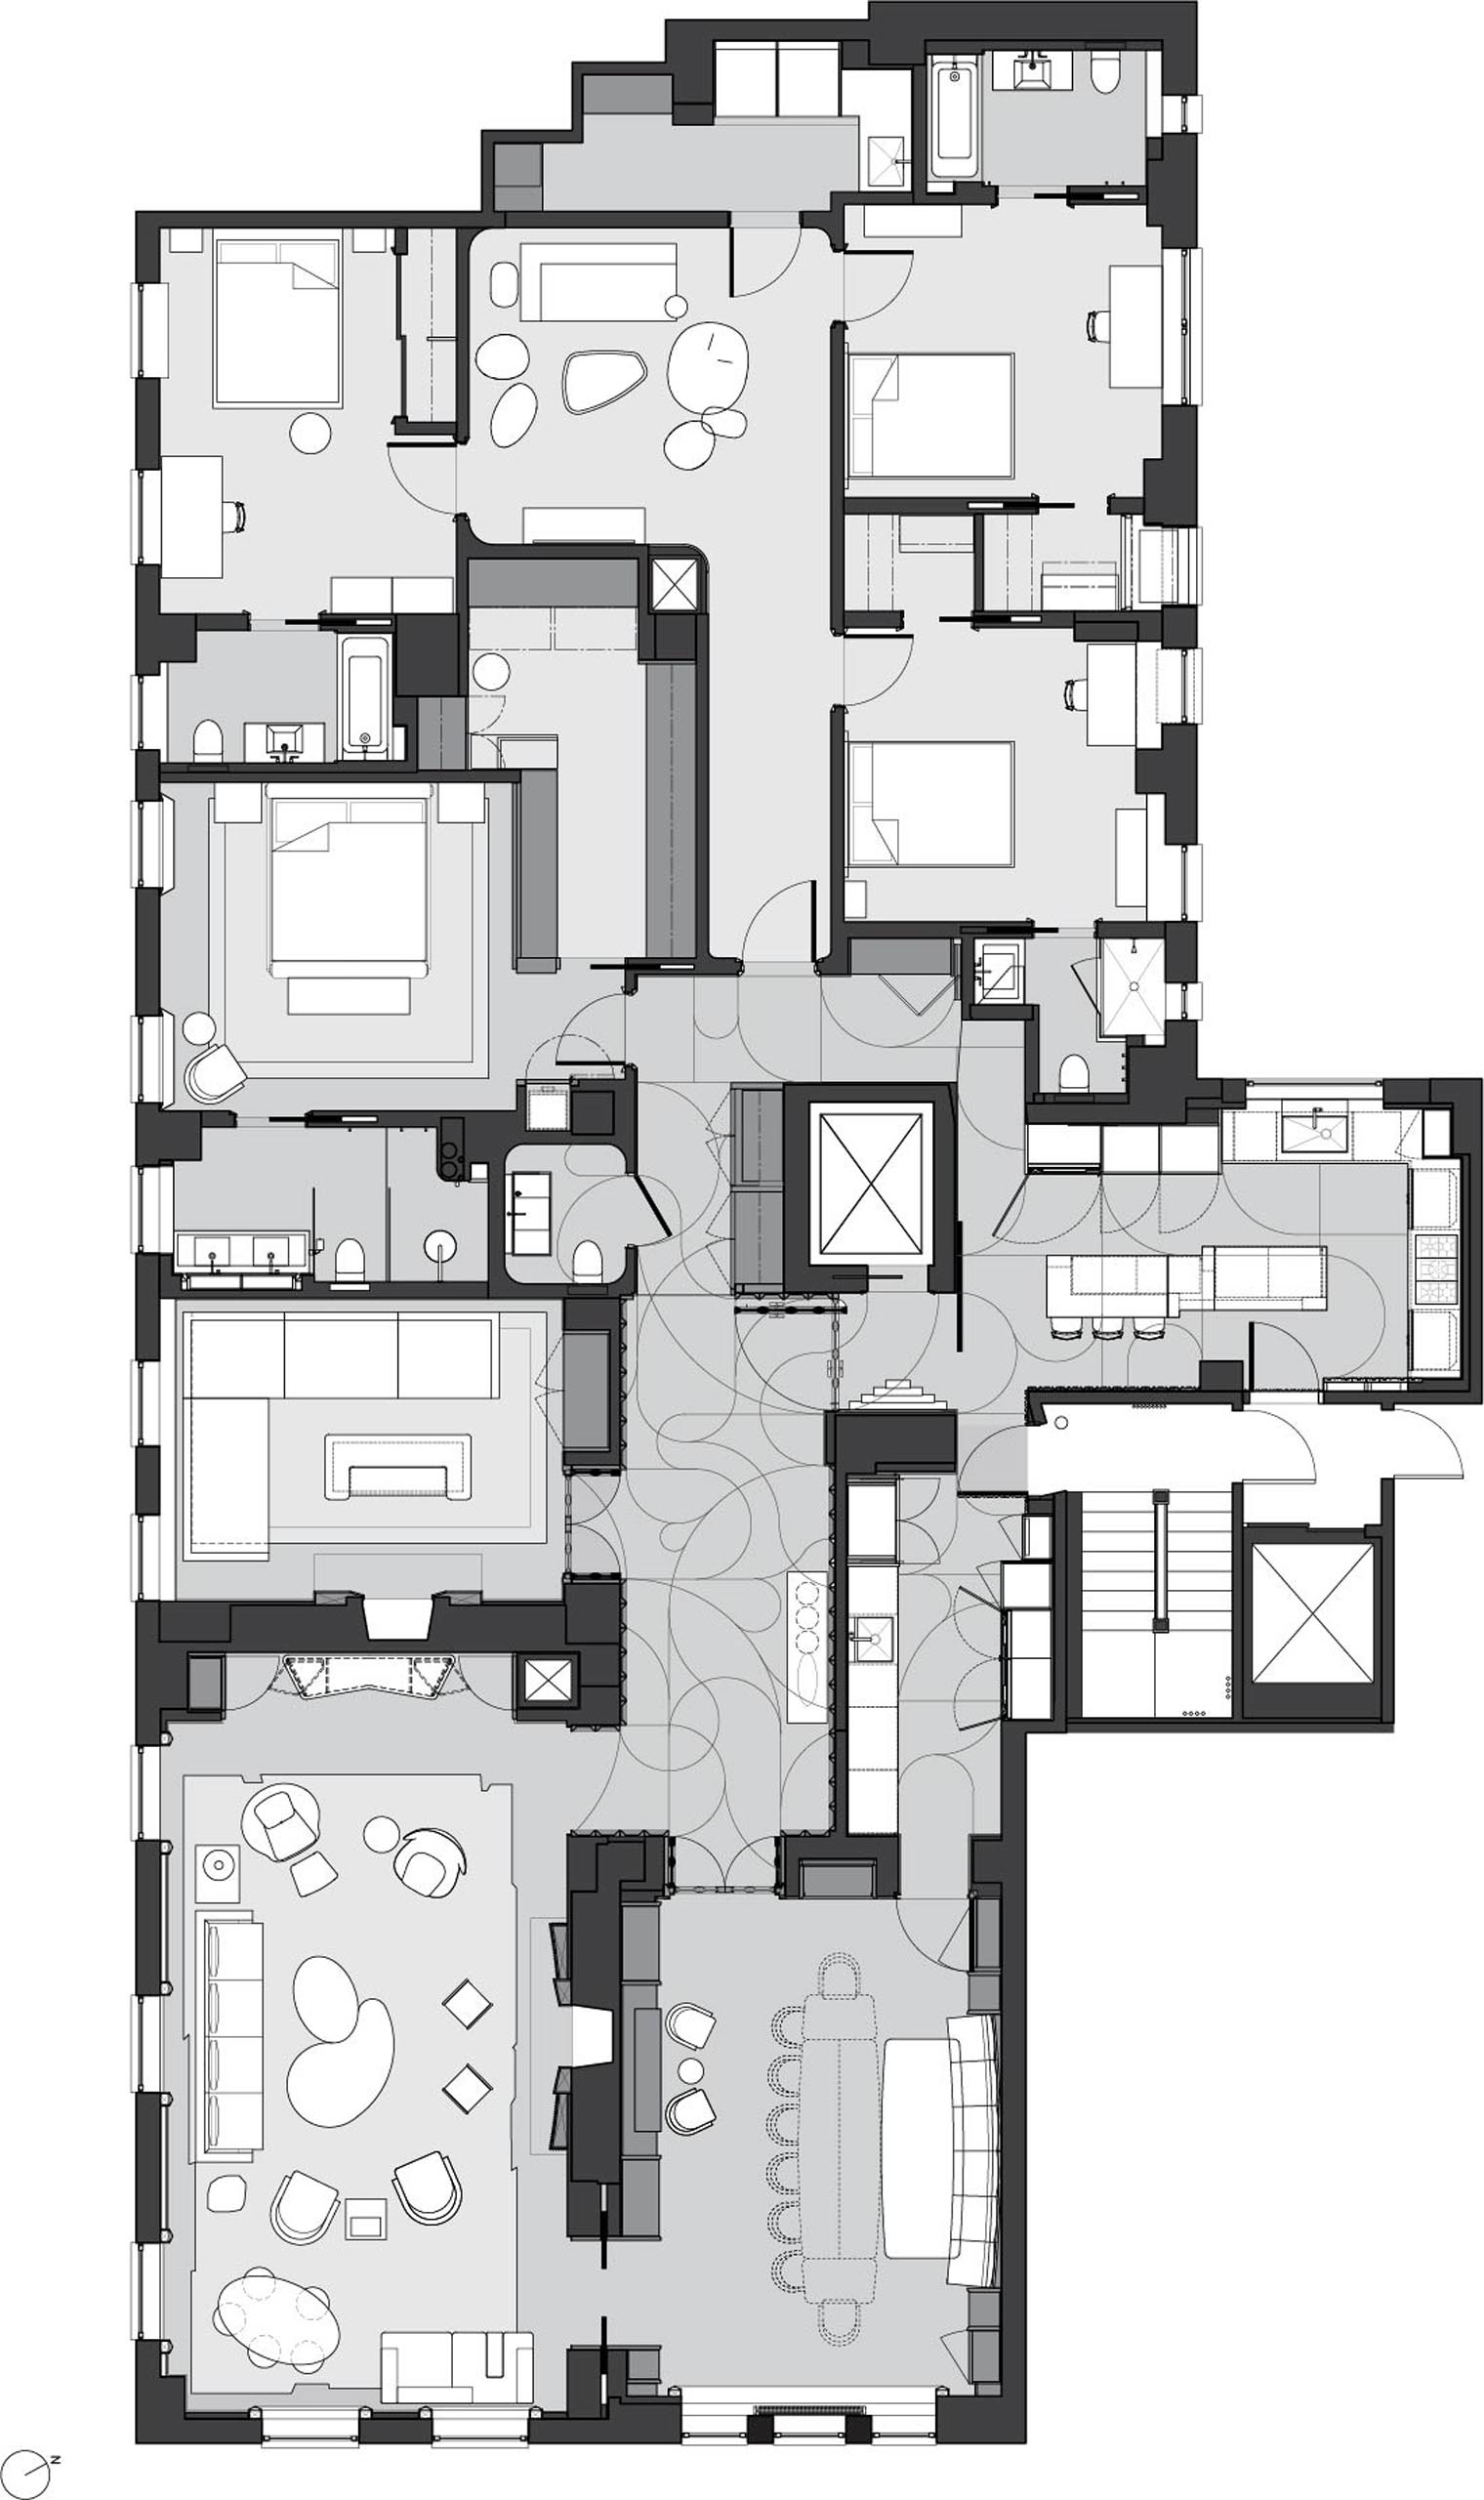 The floor plan and furniture layout of a large apartment.